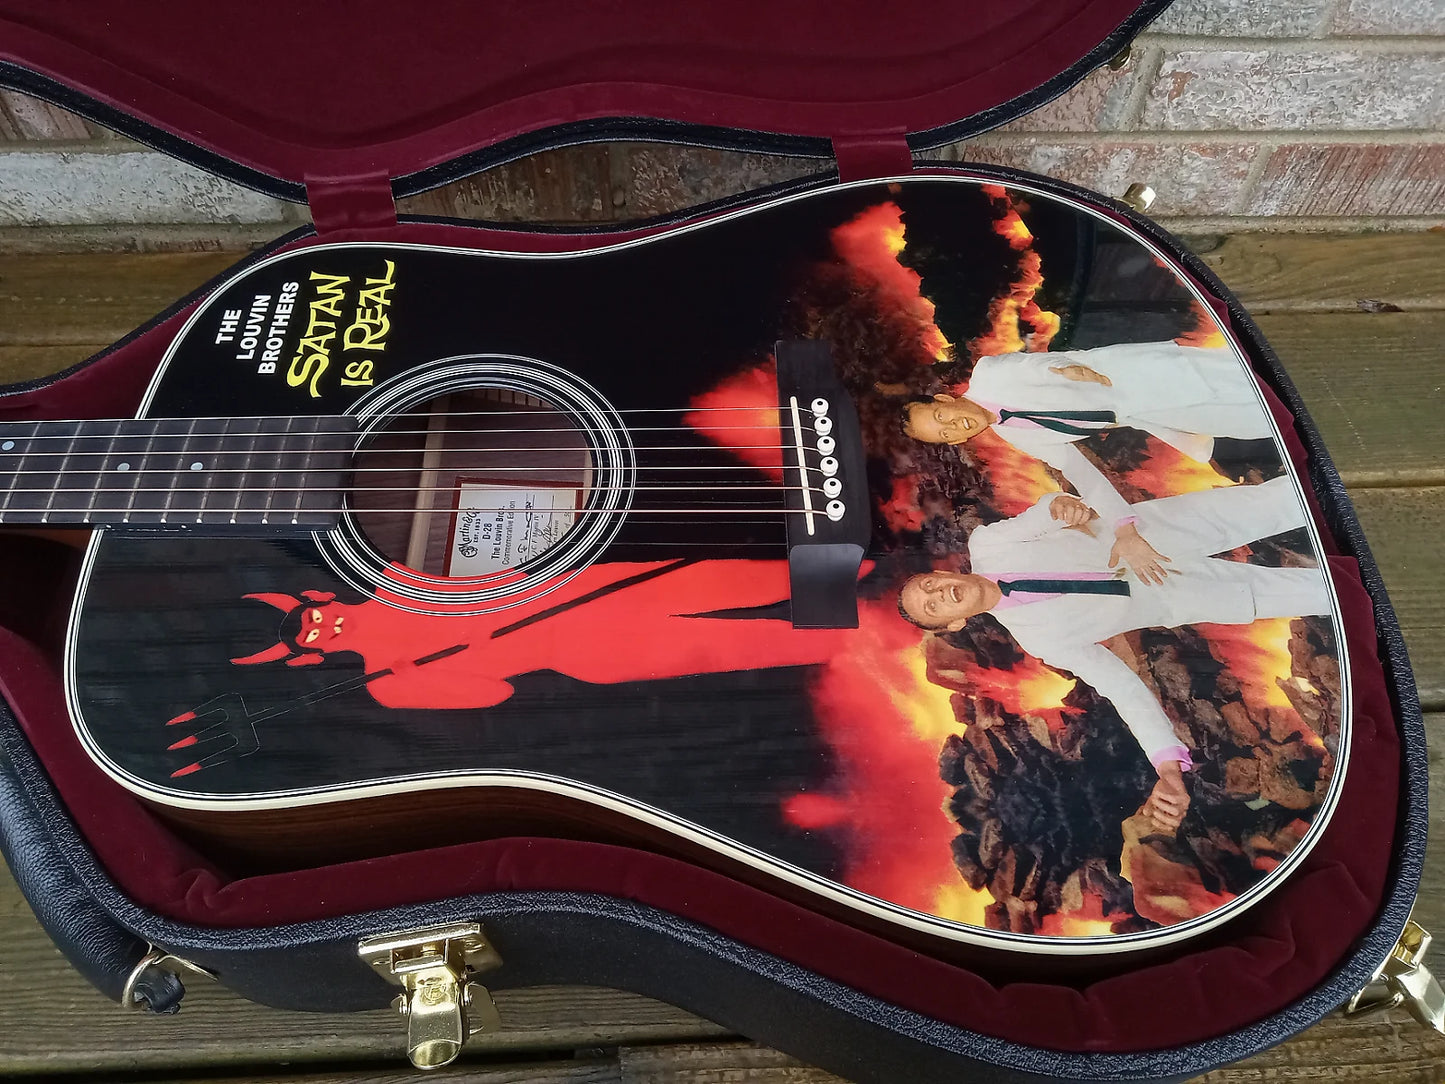 Martin Louvin Brothers "Satan is Real" D-28 Acoustic Guitar 2014 #5 of 50, Signed - Very Good Condition